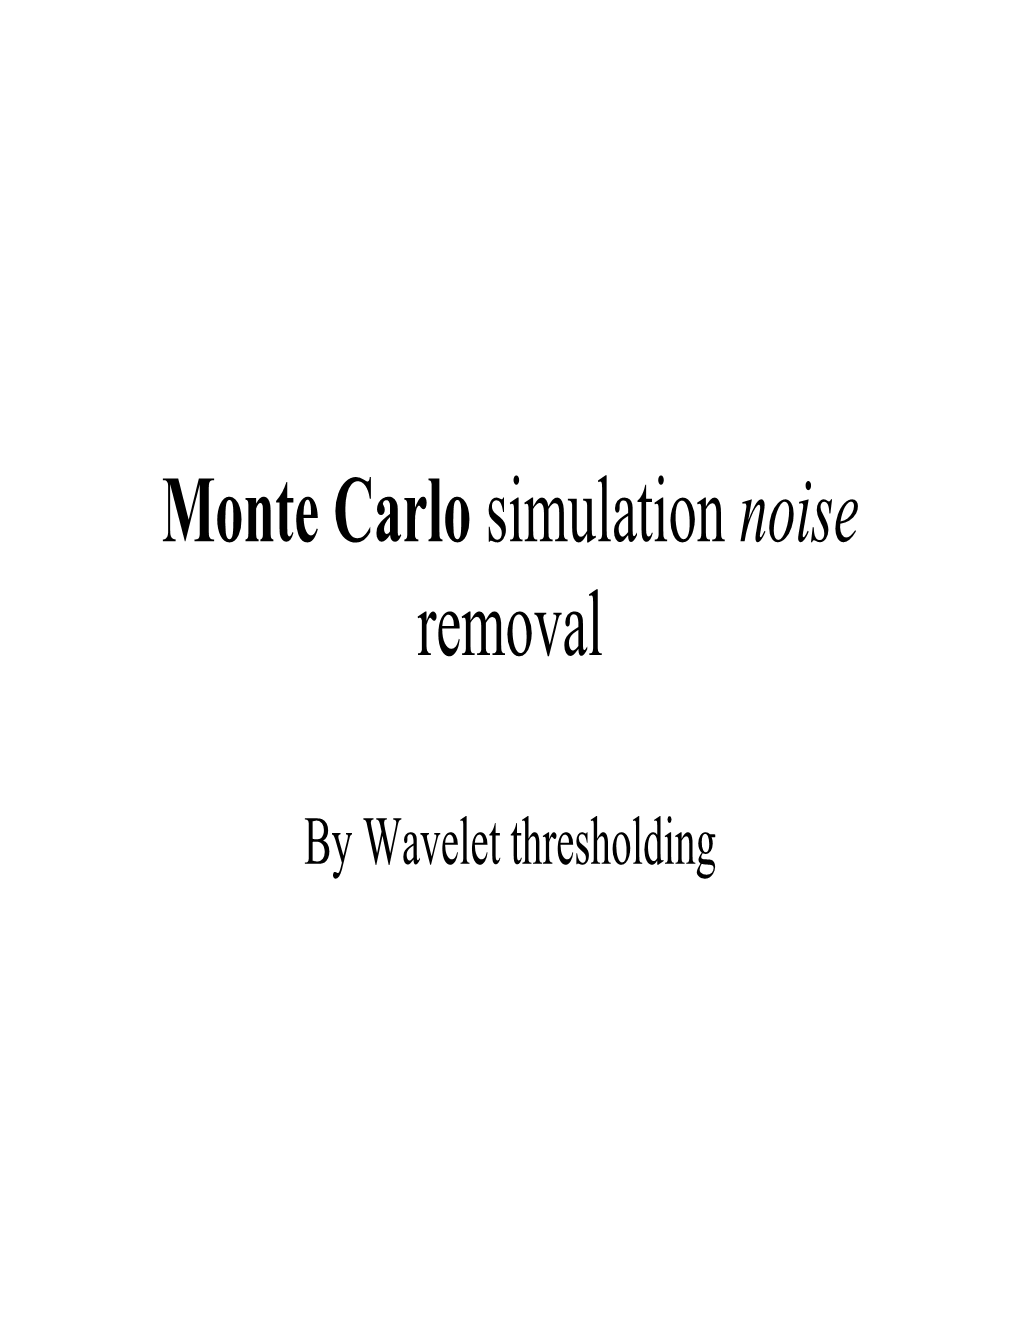 Monte Carlo Simulation Noise Removal